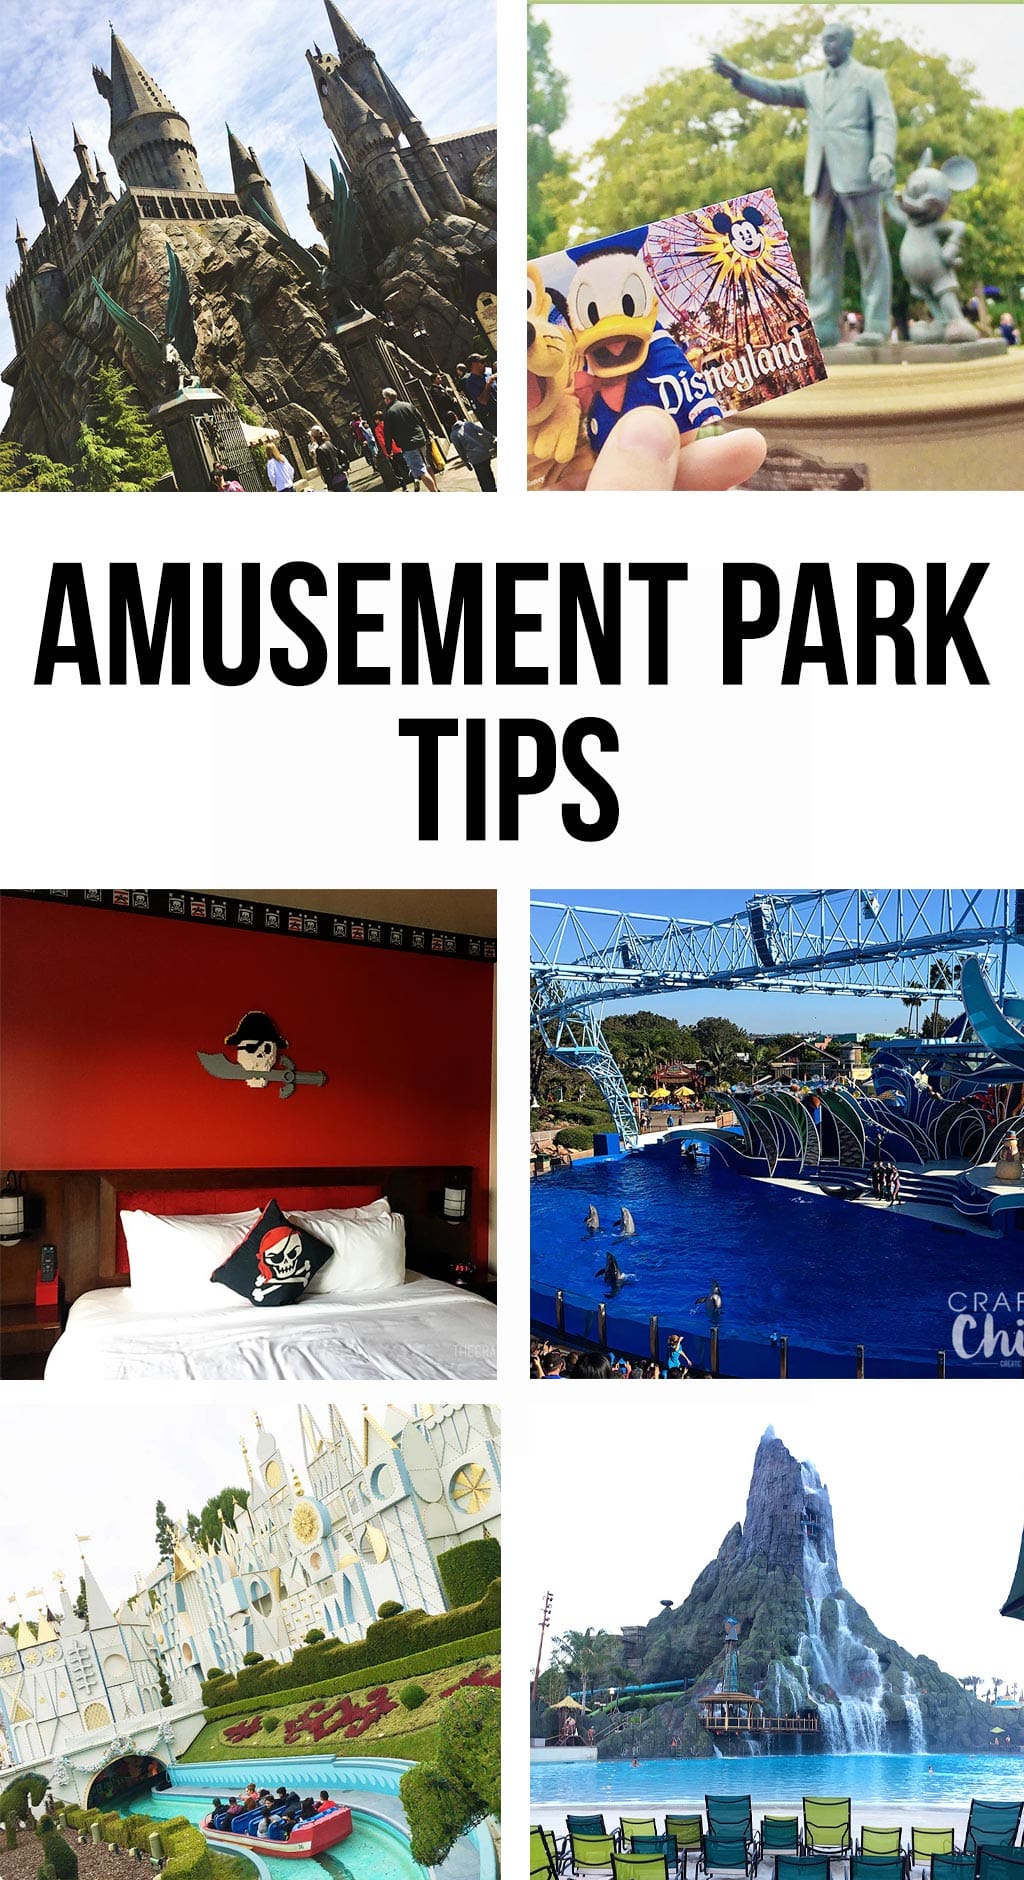 Amusement Park Tips | The best tips and tricks for your favorite amusement parks. Disneyland, Disney World, Sea World, Universal Studios Hollywood and Orlando, and Legoland. These are the best secrets! #amusementpark #tips #disneyland #seaworld #legoland #harrypotter #universalstudios